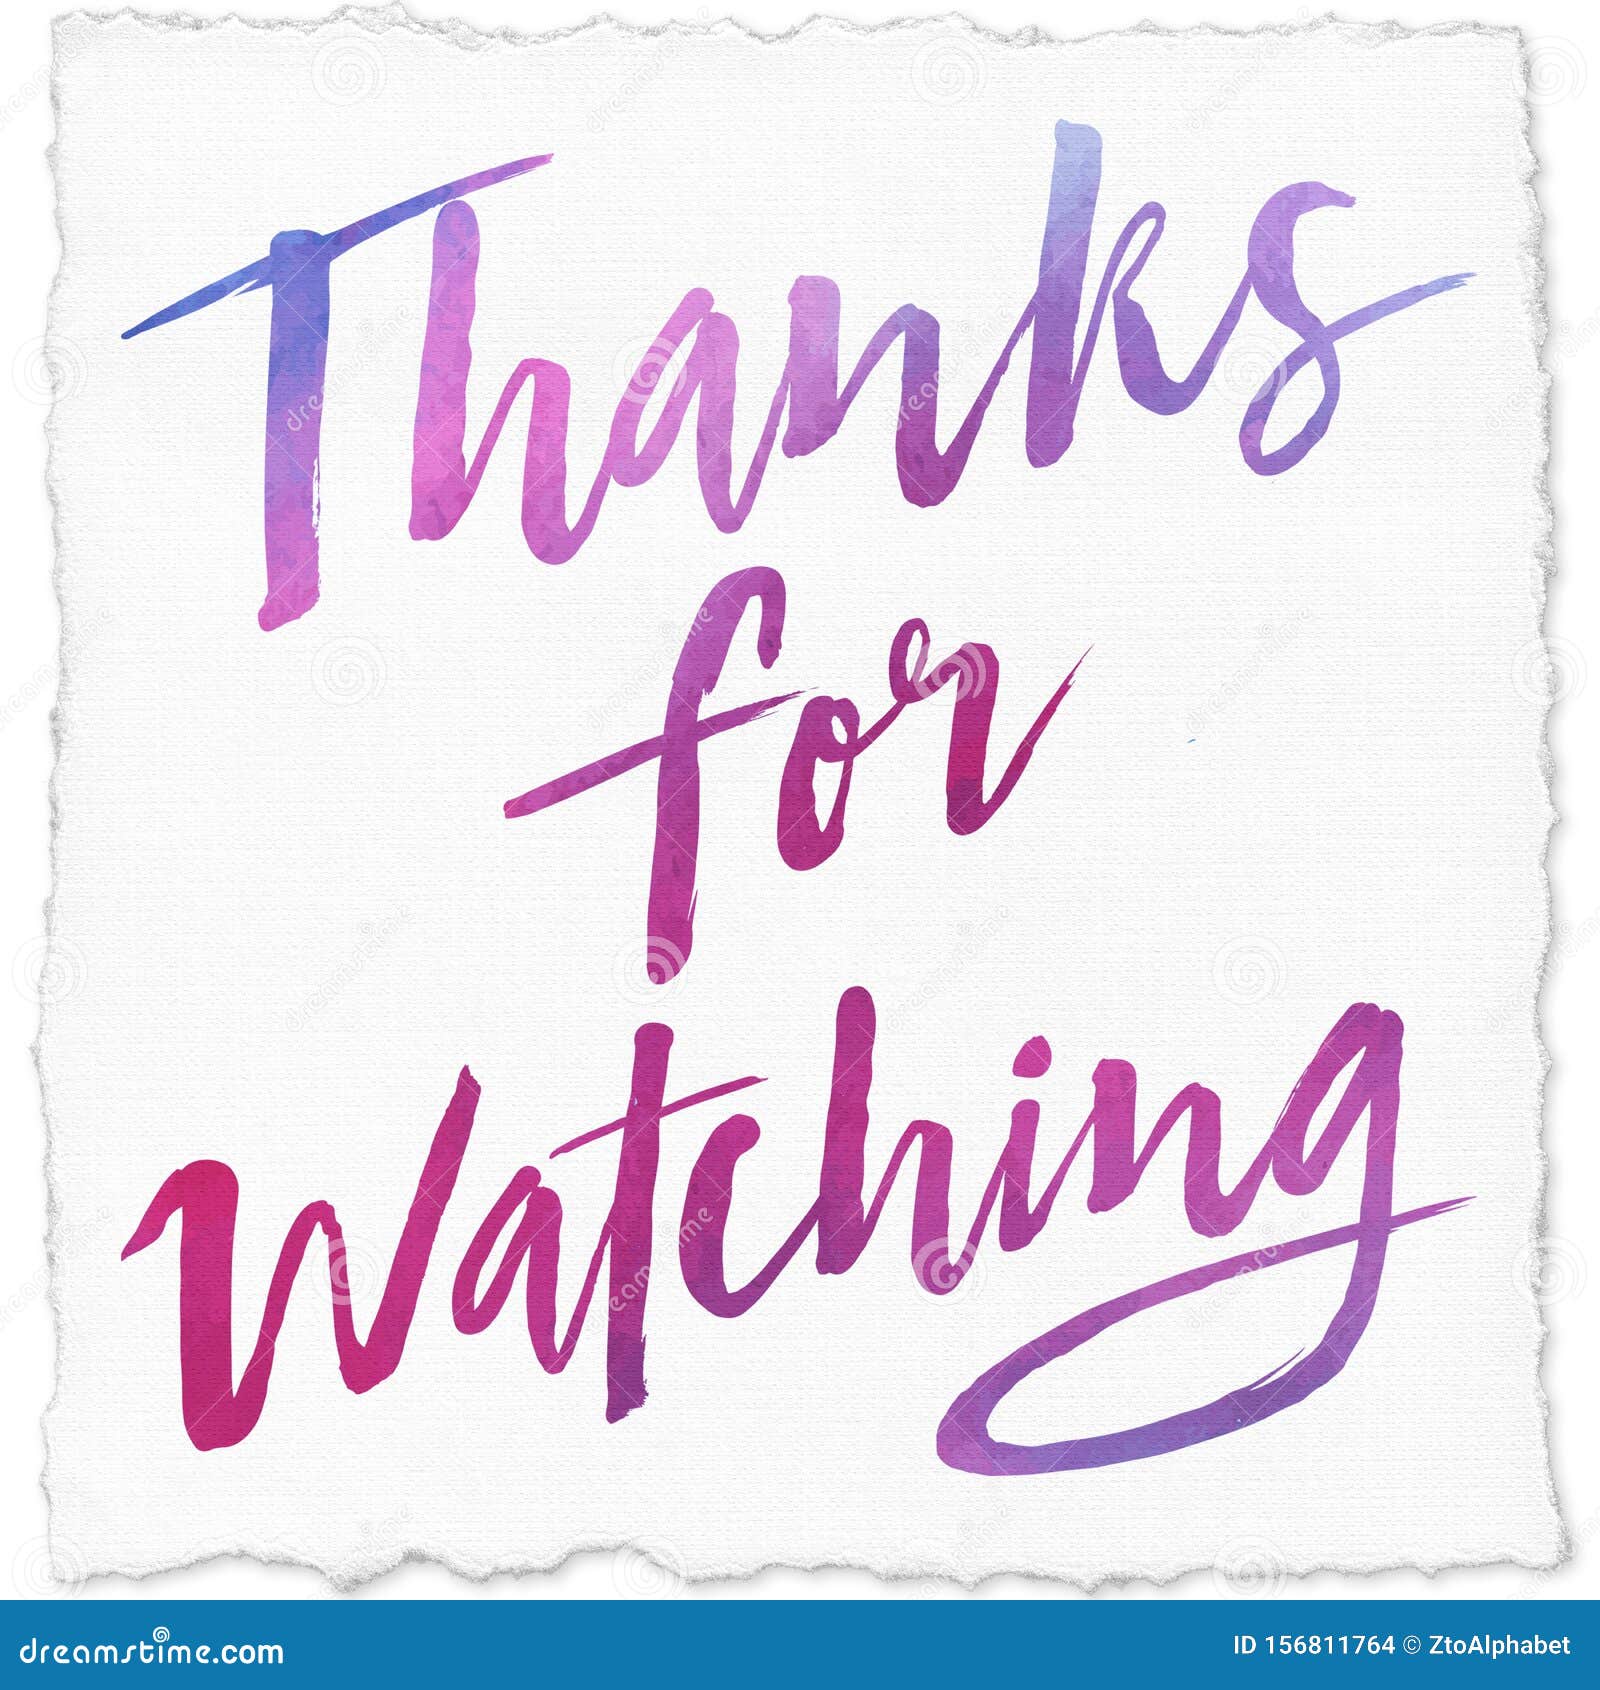 1 Thanks Watching Photos Free Royalty Free Stock Photos From Dreamstime